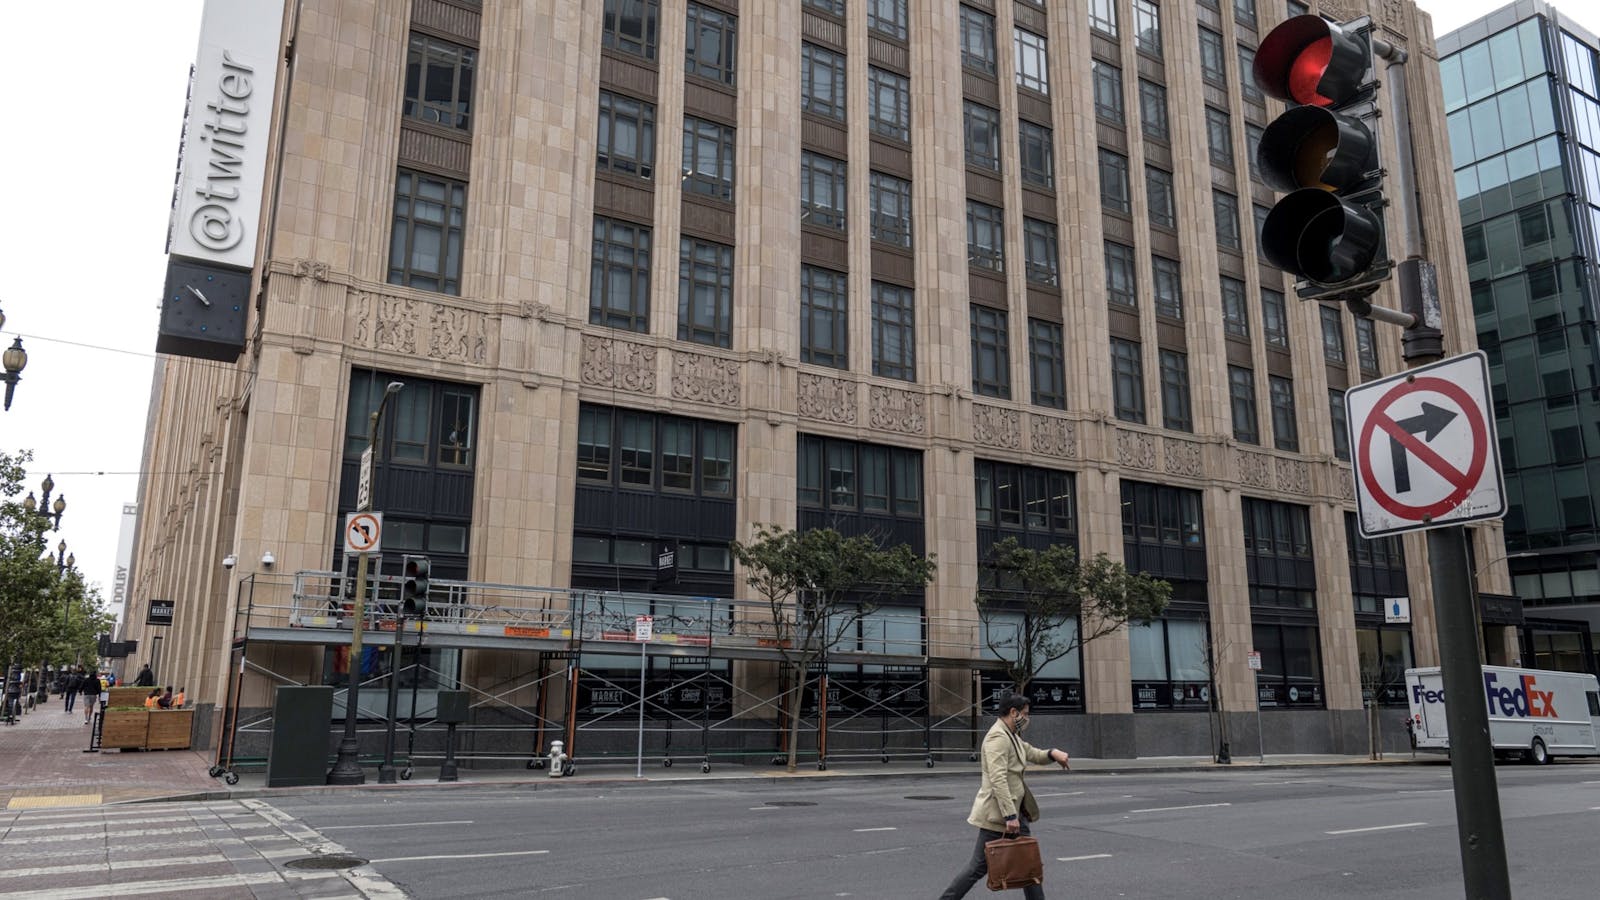 Twitter's San Francisco headquarters. Photo by Bloomberg